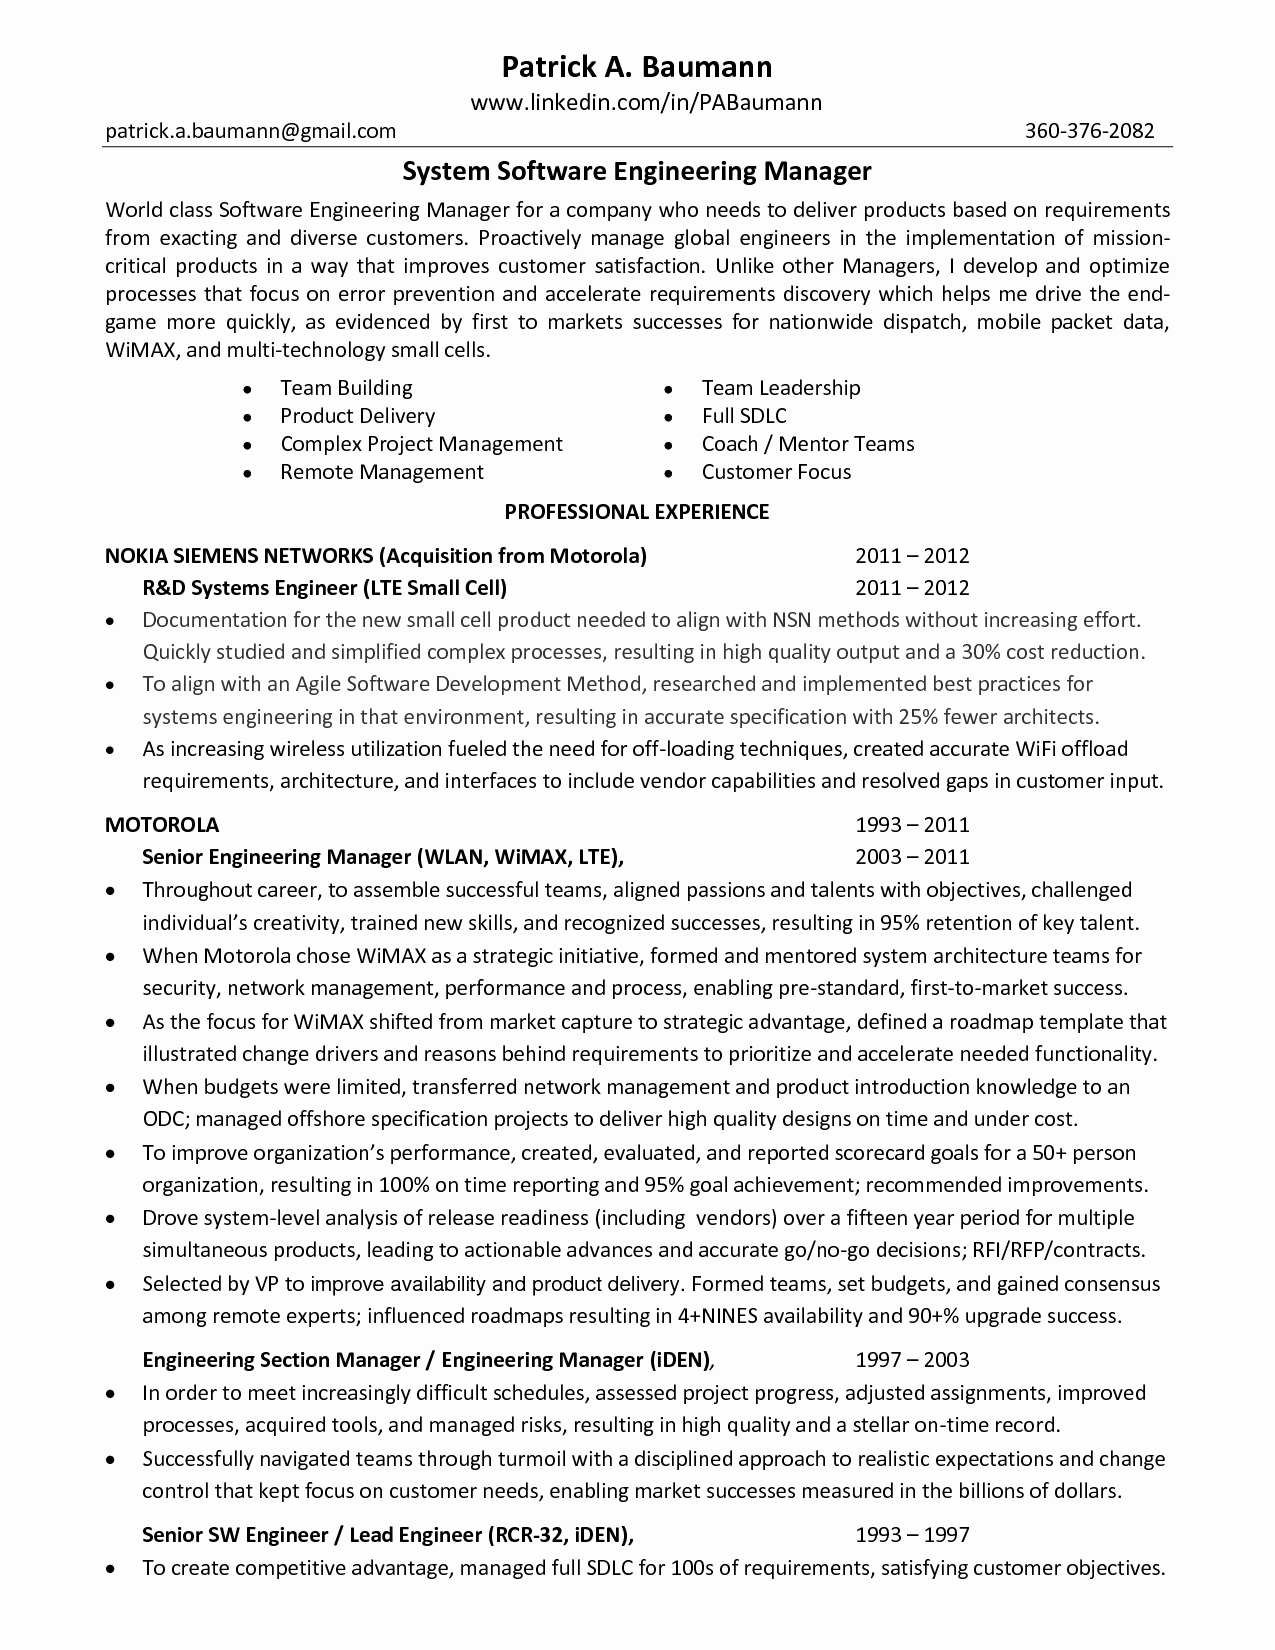 Software Engineering Manager Resume